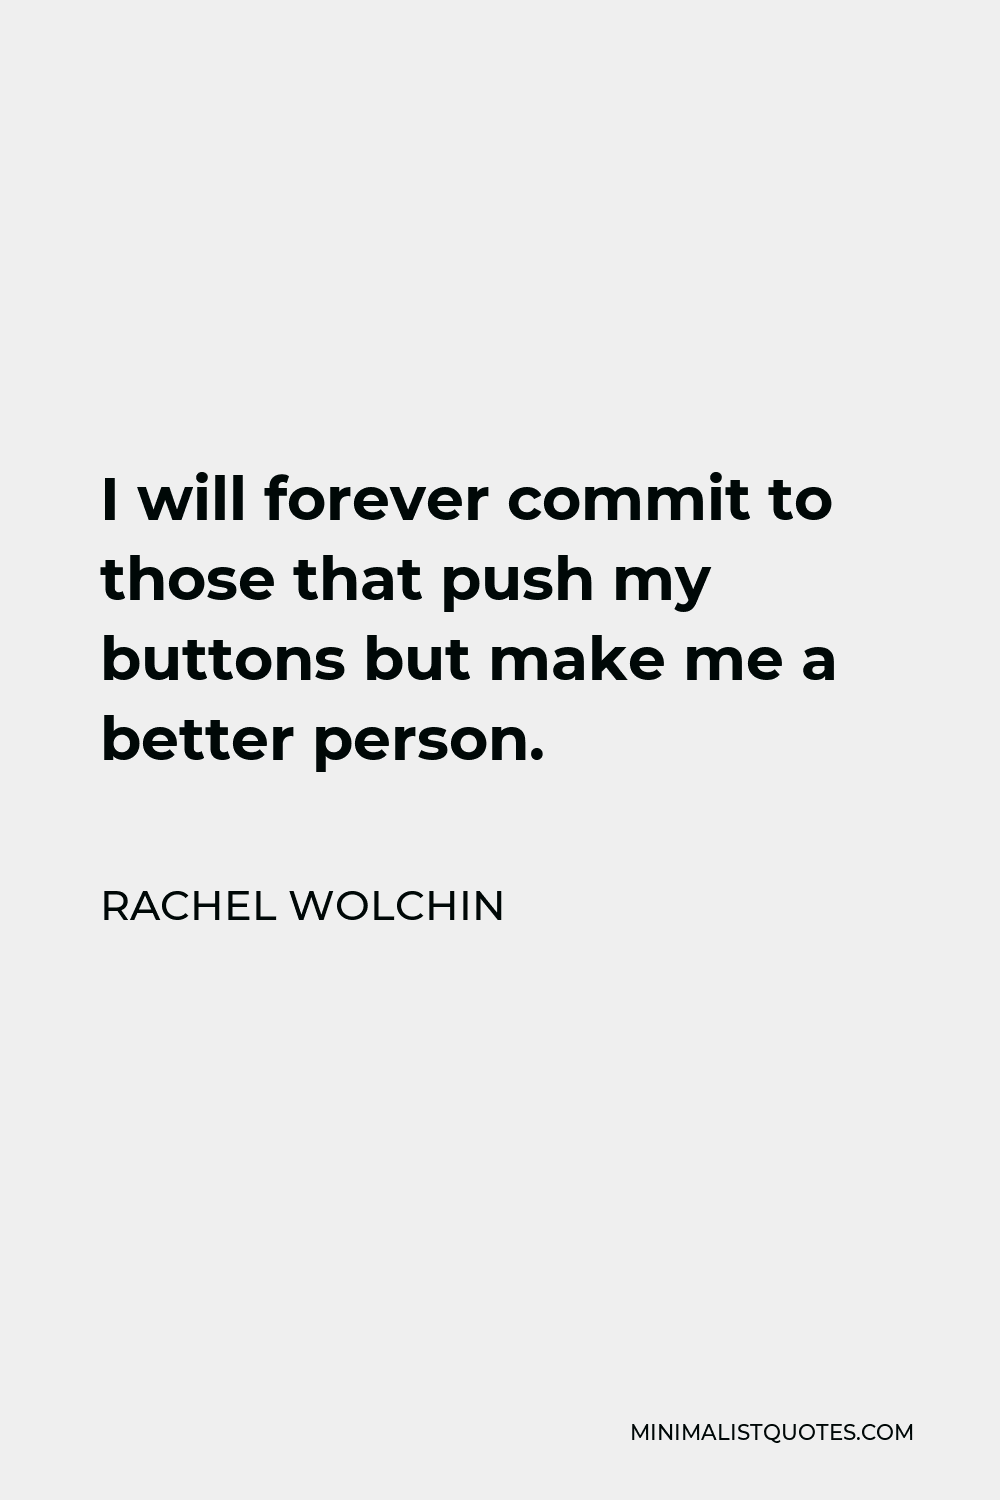 Rachel Wolchin Quote - I will forever commit to those that push my buttons but make me a better person.